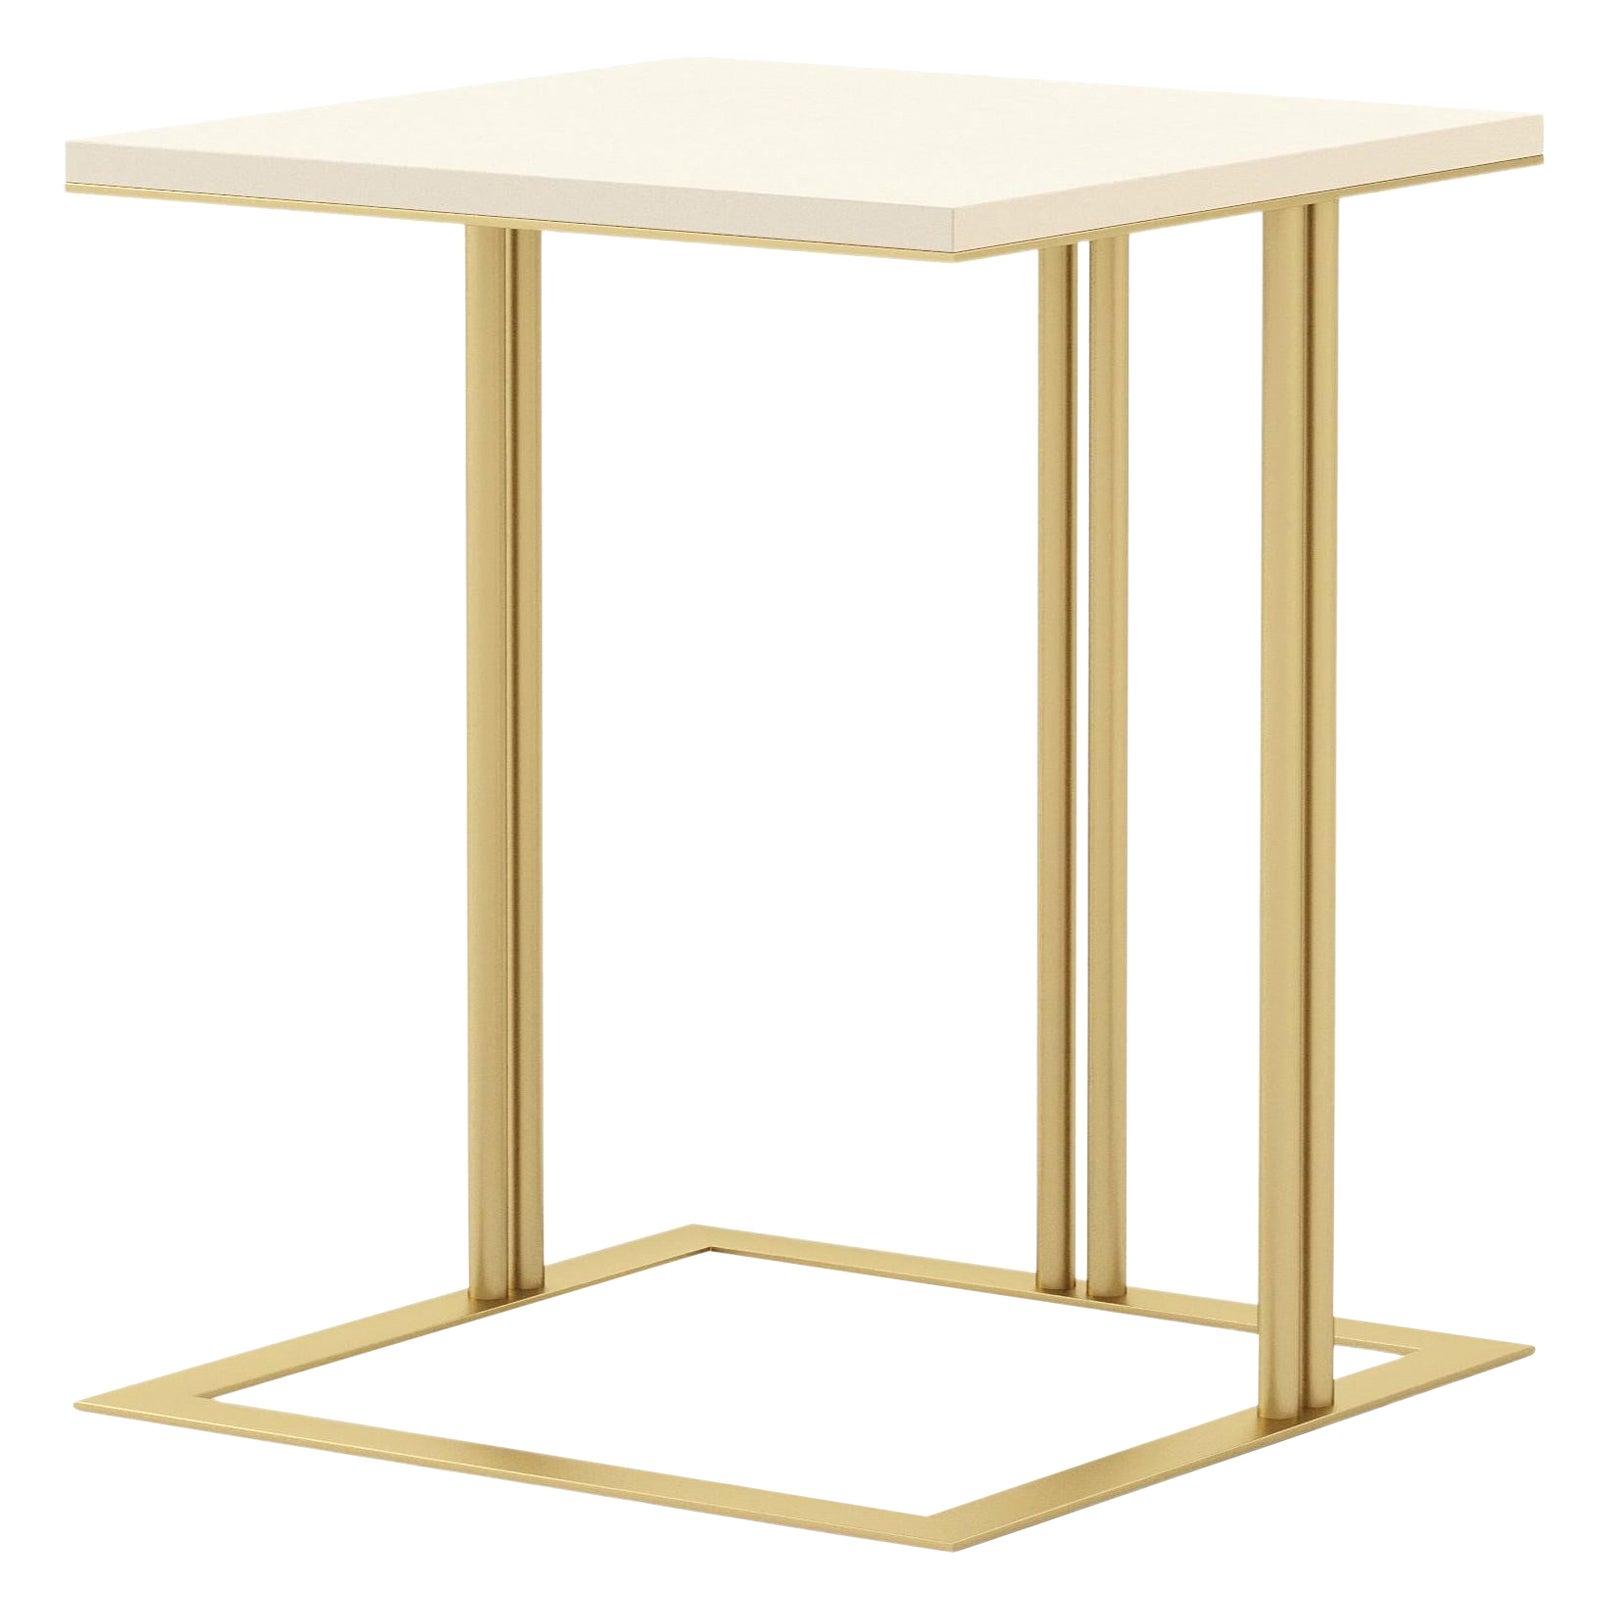 Modern Louise Side Table made with lacquer and brass, Handmade by Stylish Club